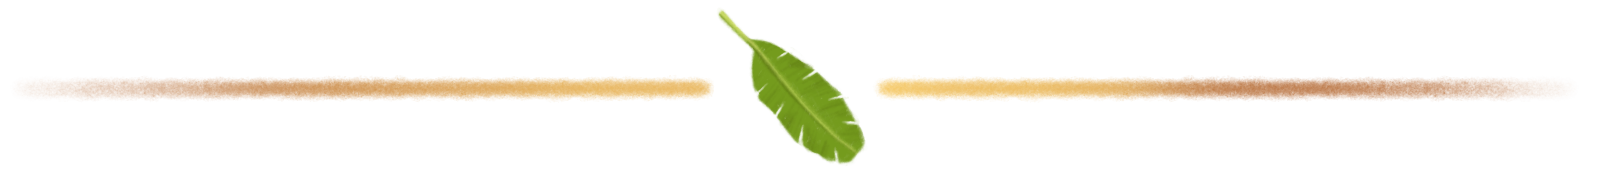 Illustration of banana leaf used to divide story text